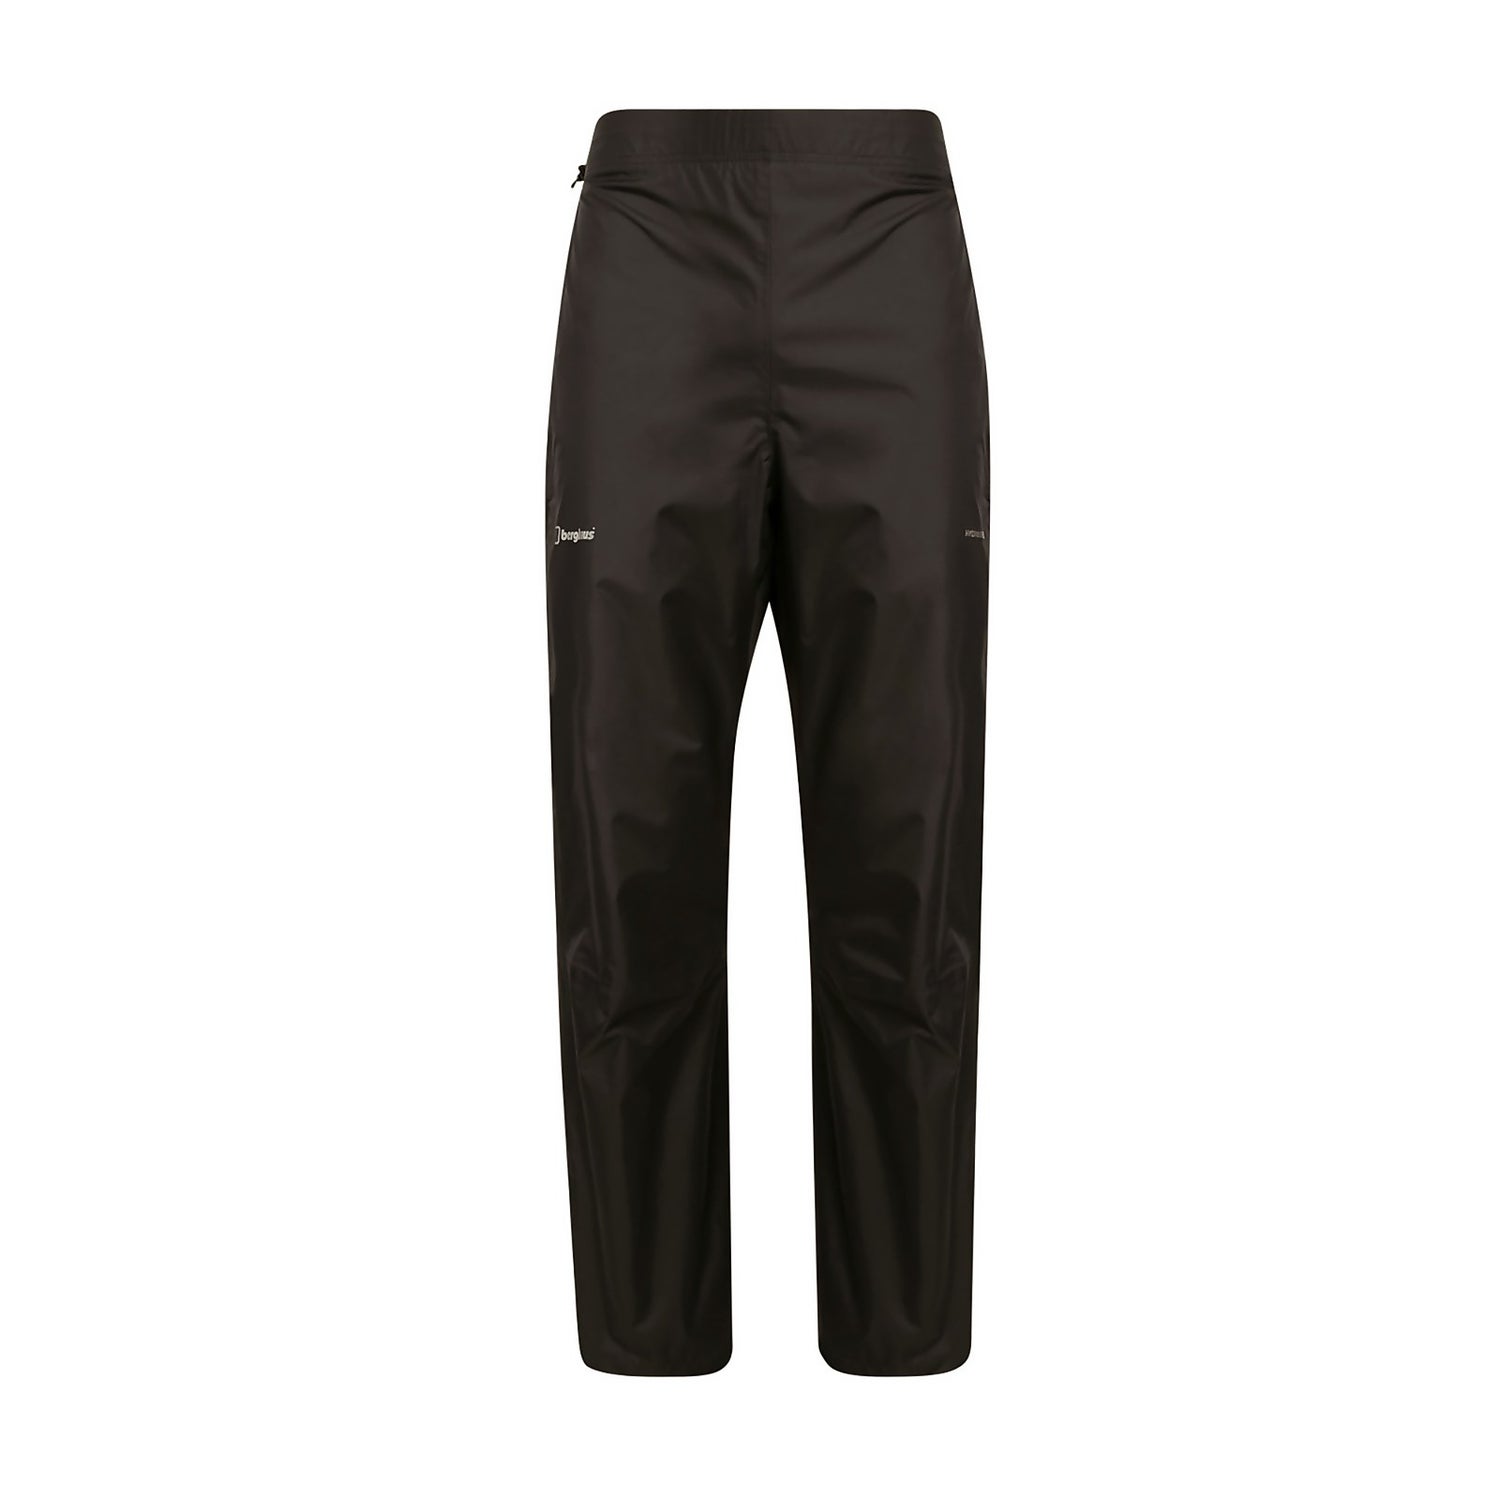 Men’s Berghaus Deluge Pro 2.0 Pant size S and M available BNWT black 